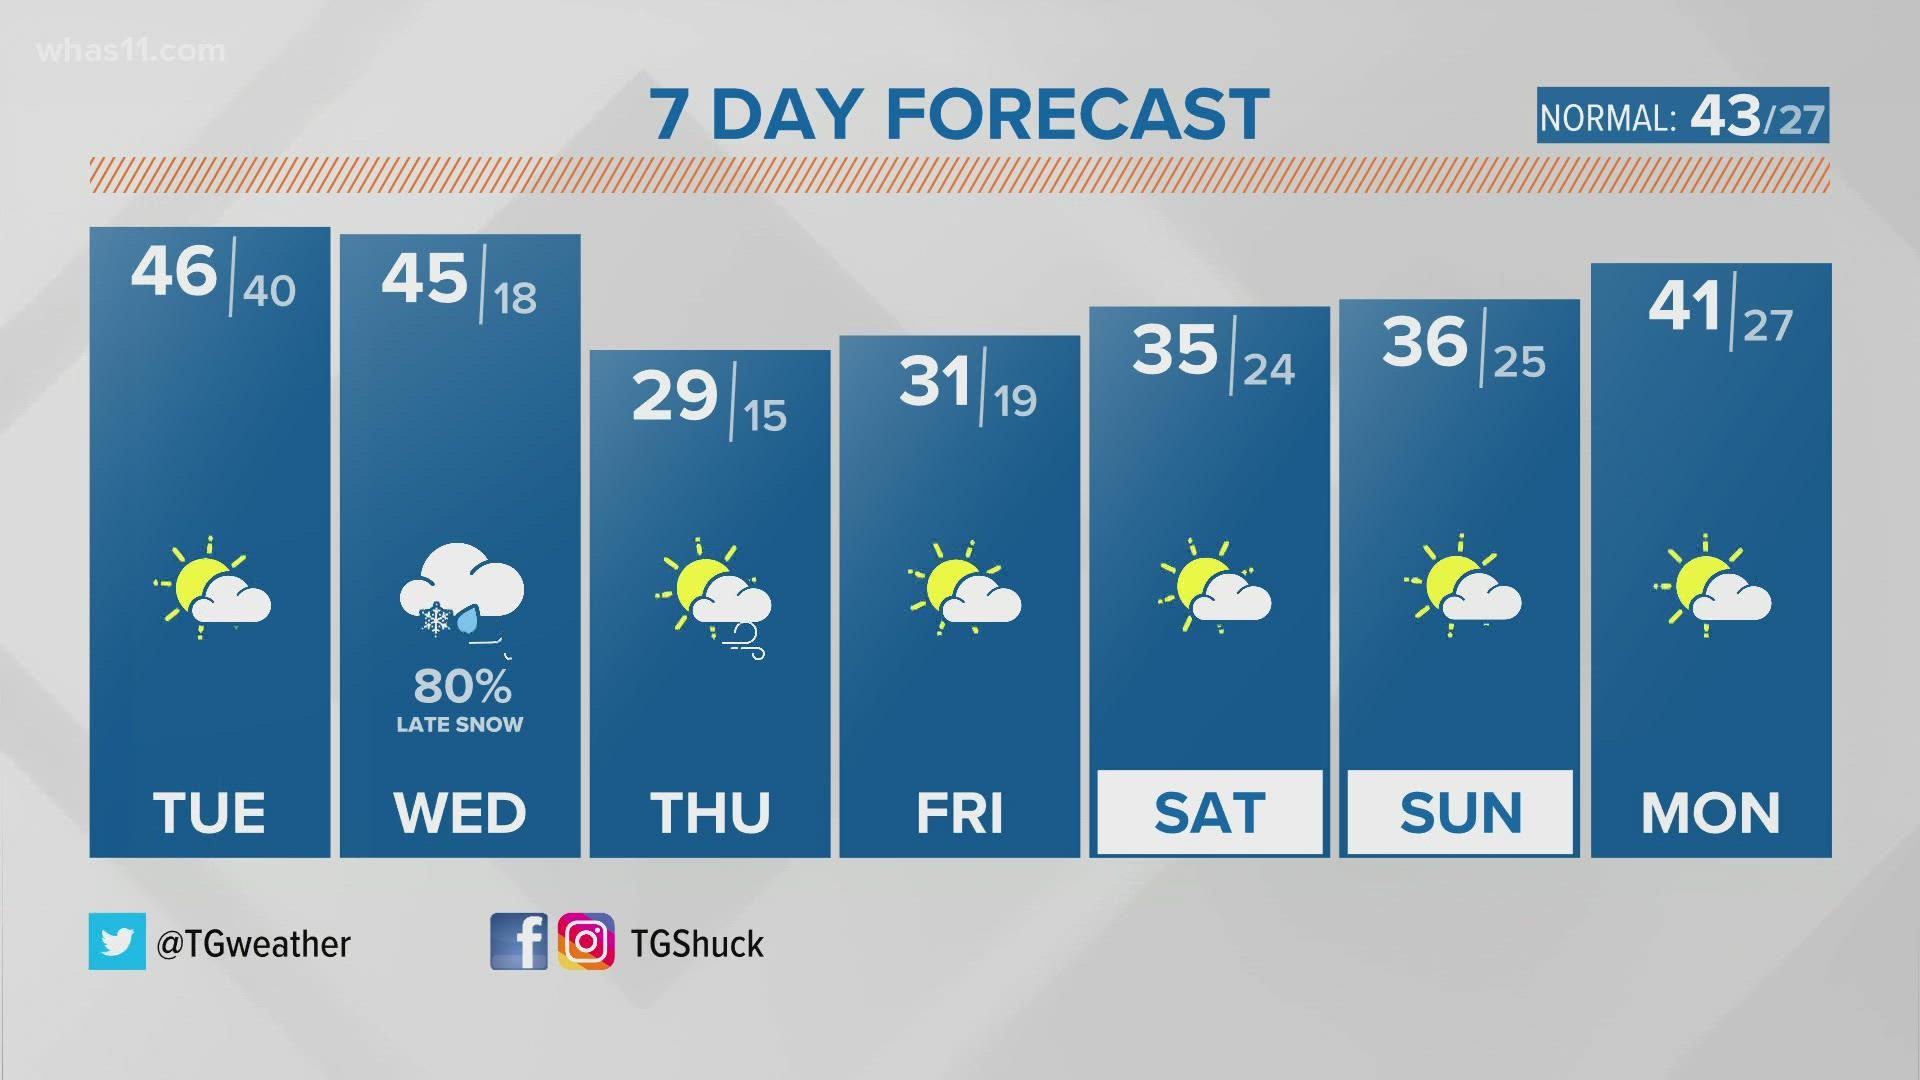 Highs in the 40s Tuesday and Wednesday before dropping back down on Thursday.